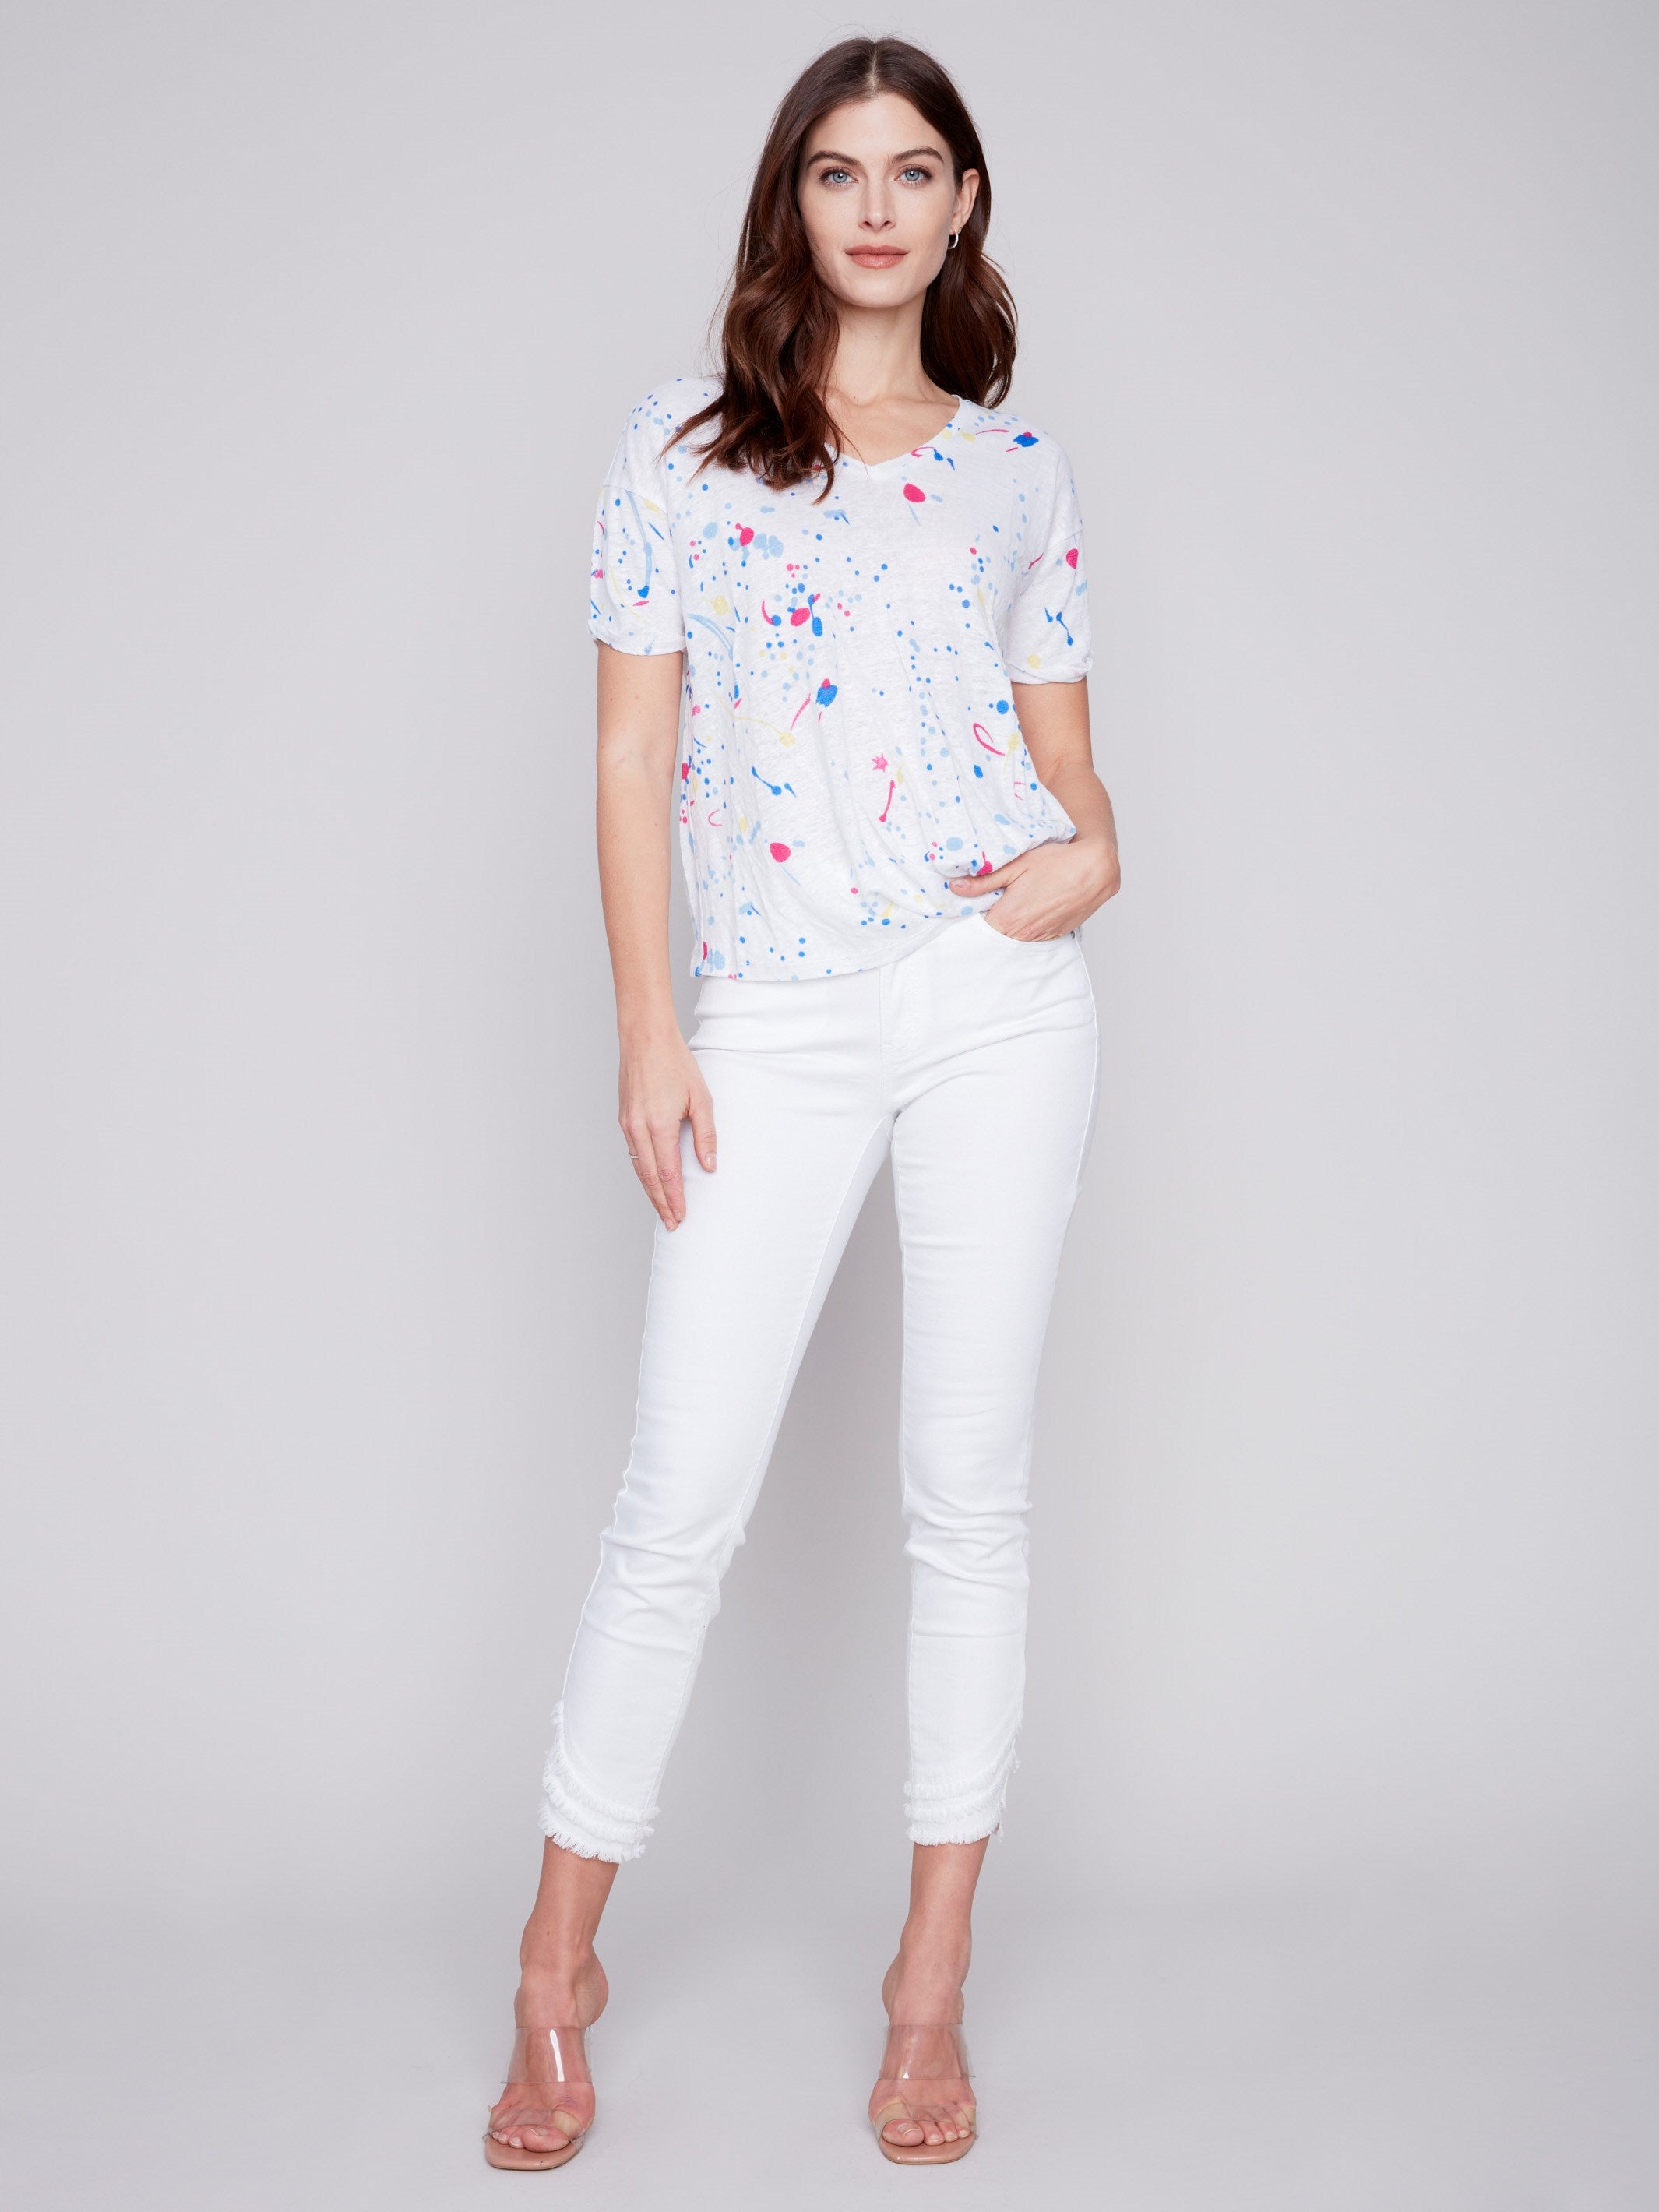 Charlie B Printed Linen Top With Front Twist Knot - Splash - Image 5